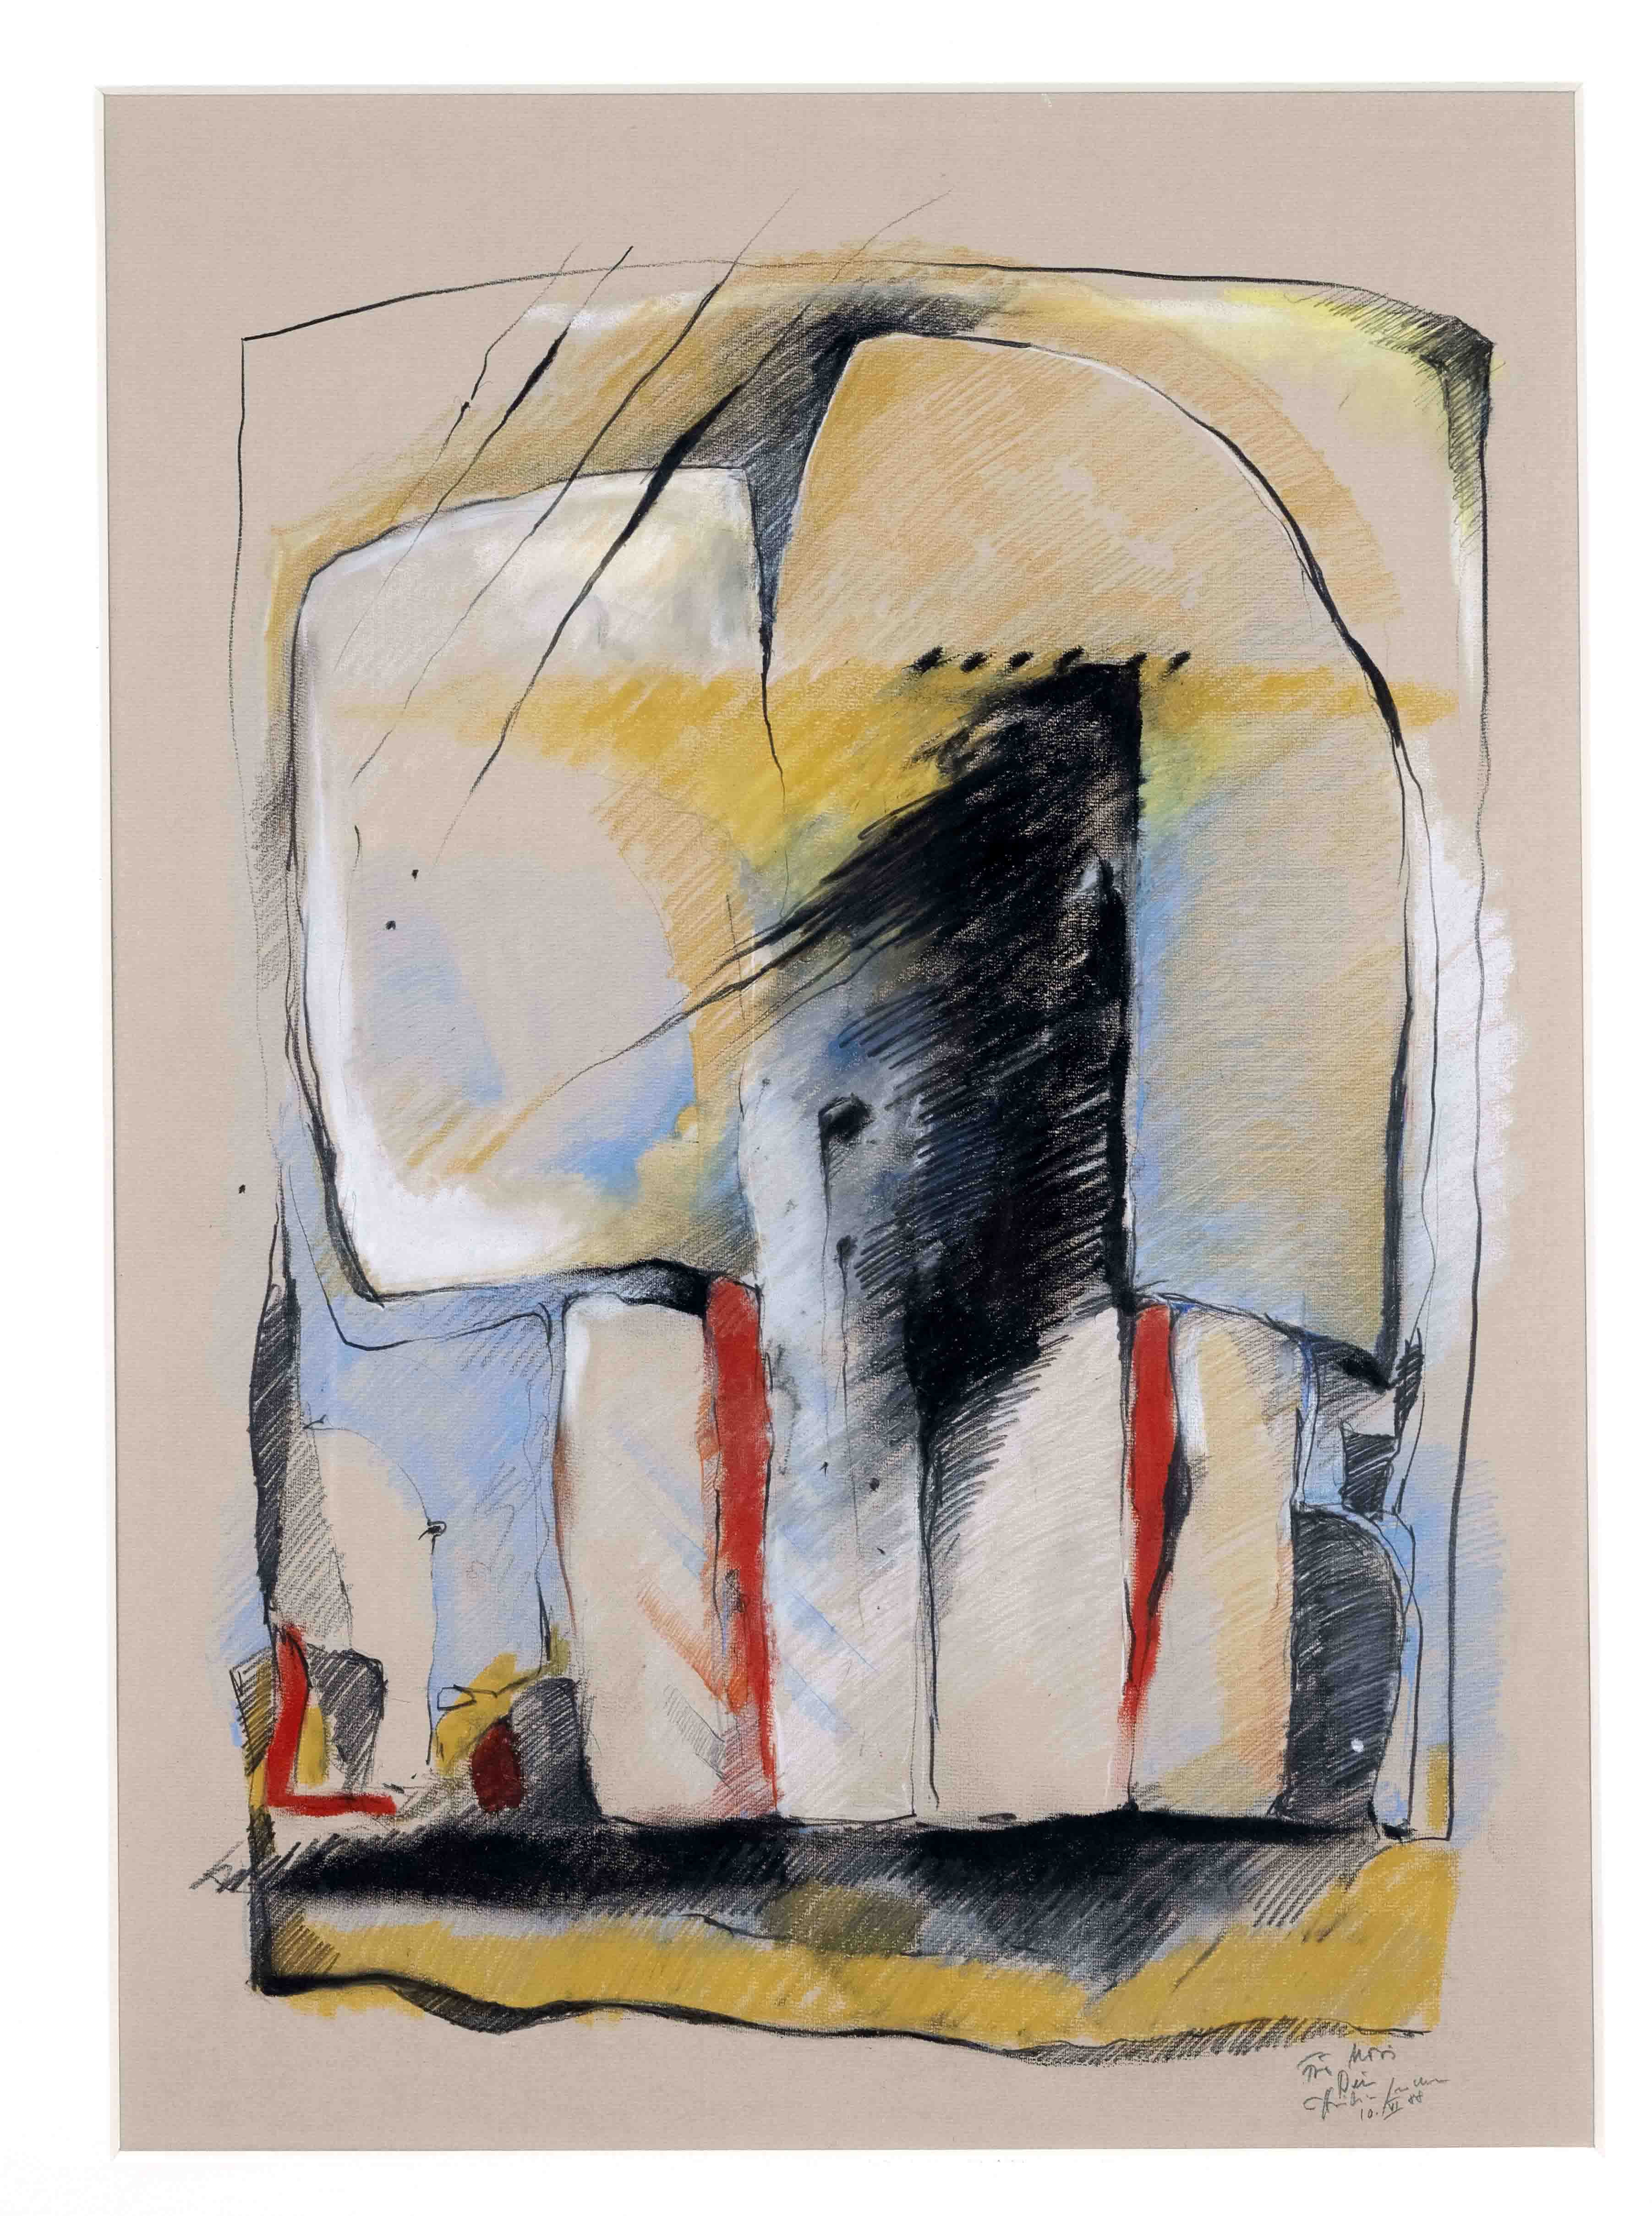 Unidentified artist late 20th century, large, abstract composition, colored chalk over pencil on